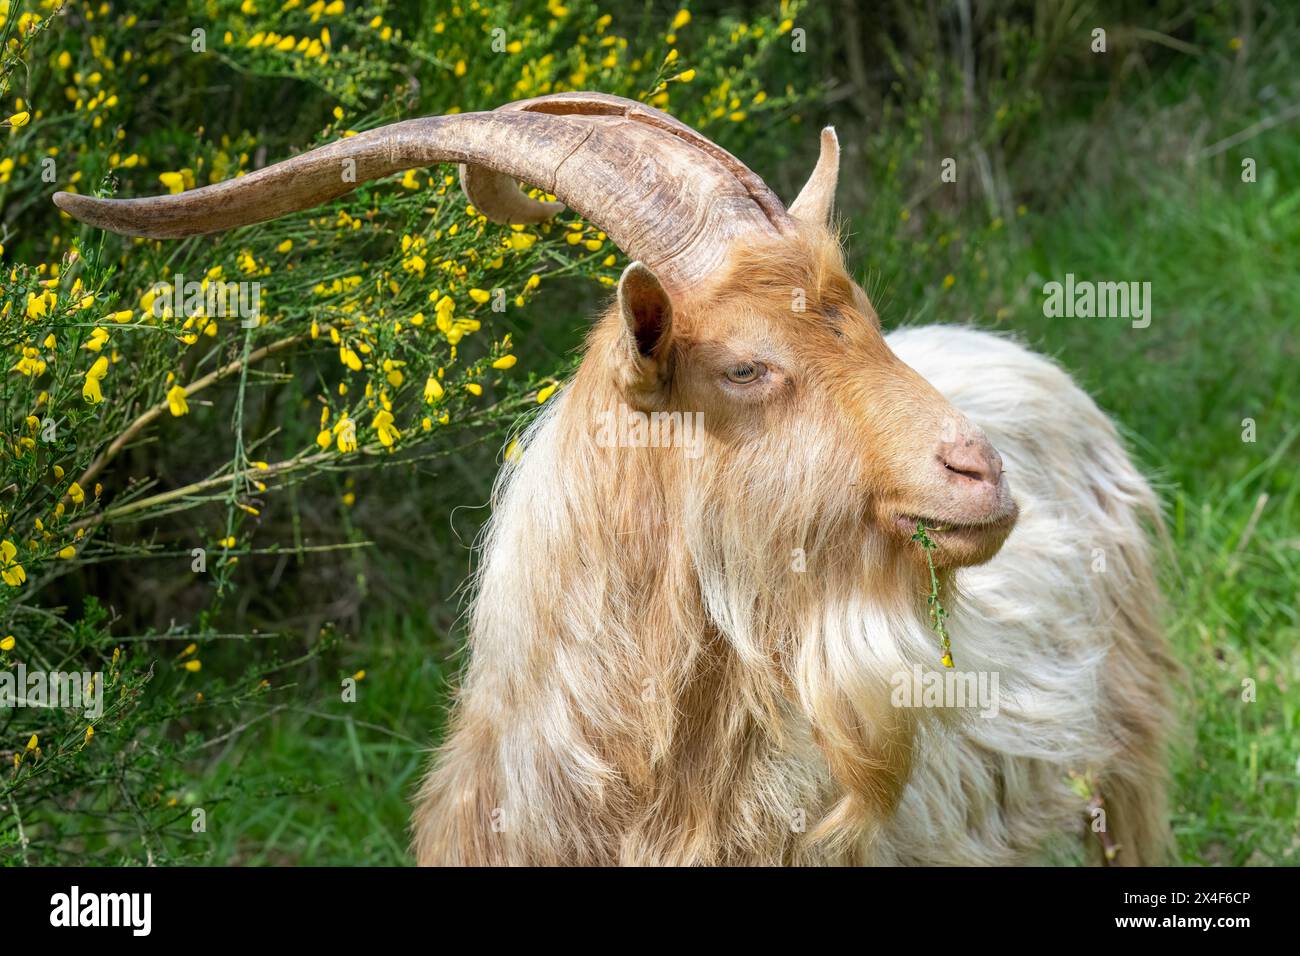 Issaquah, Washington State, USA. A rare heritage breed, golden guernsey billy goat, standing beside a Scotch Broom shrub. (PR) Stock Photo